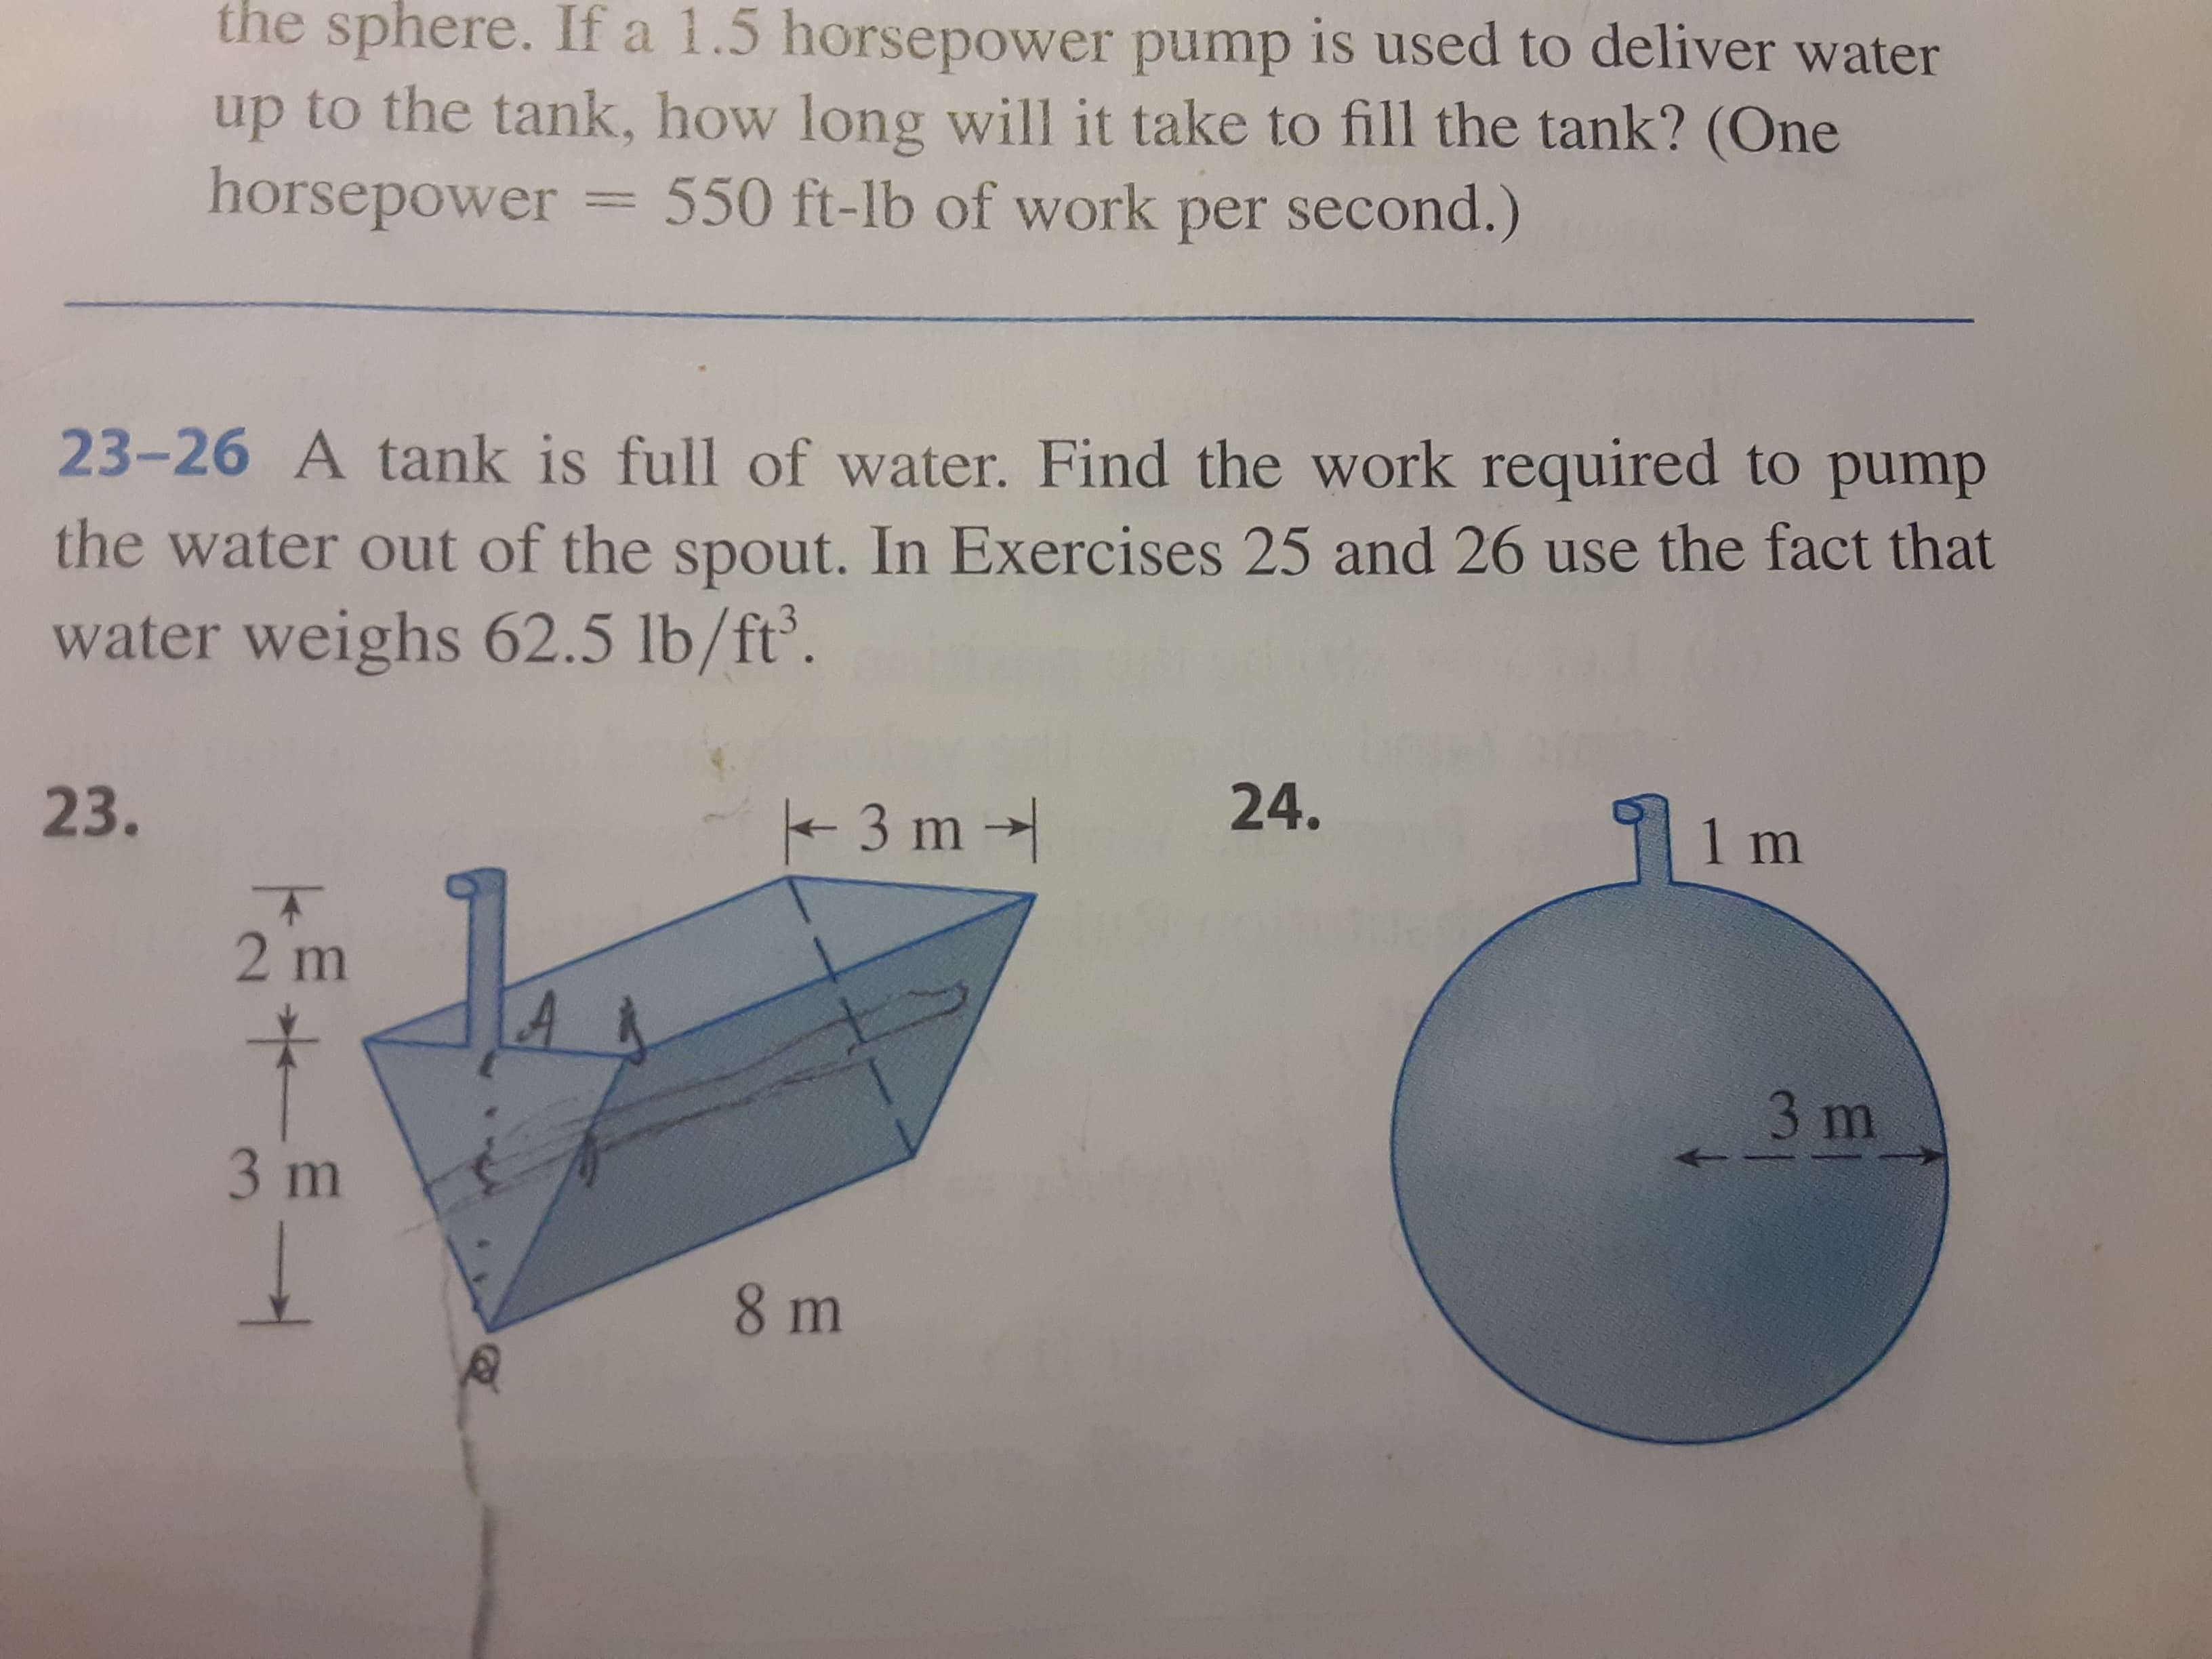 23-26 A tank is full of water. Find the work required to pump
the water out of the spout. In Exercises 25 and 26 use the fact that
water weighs 62.5 lb/ft.
23.
3 m
24.
1 m
2m
3 m
3m
8 m
